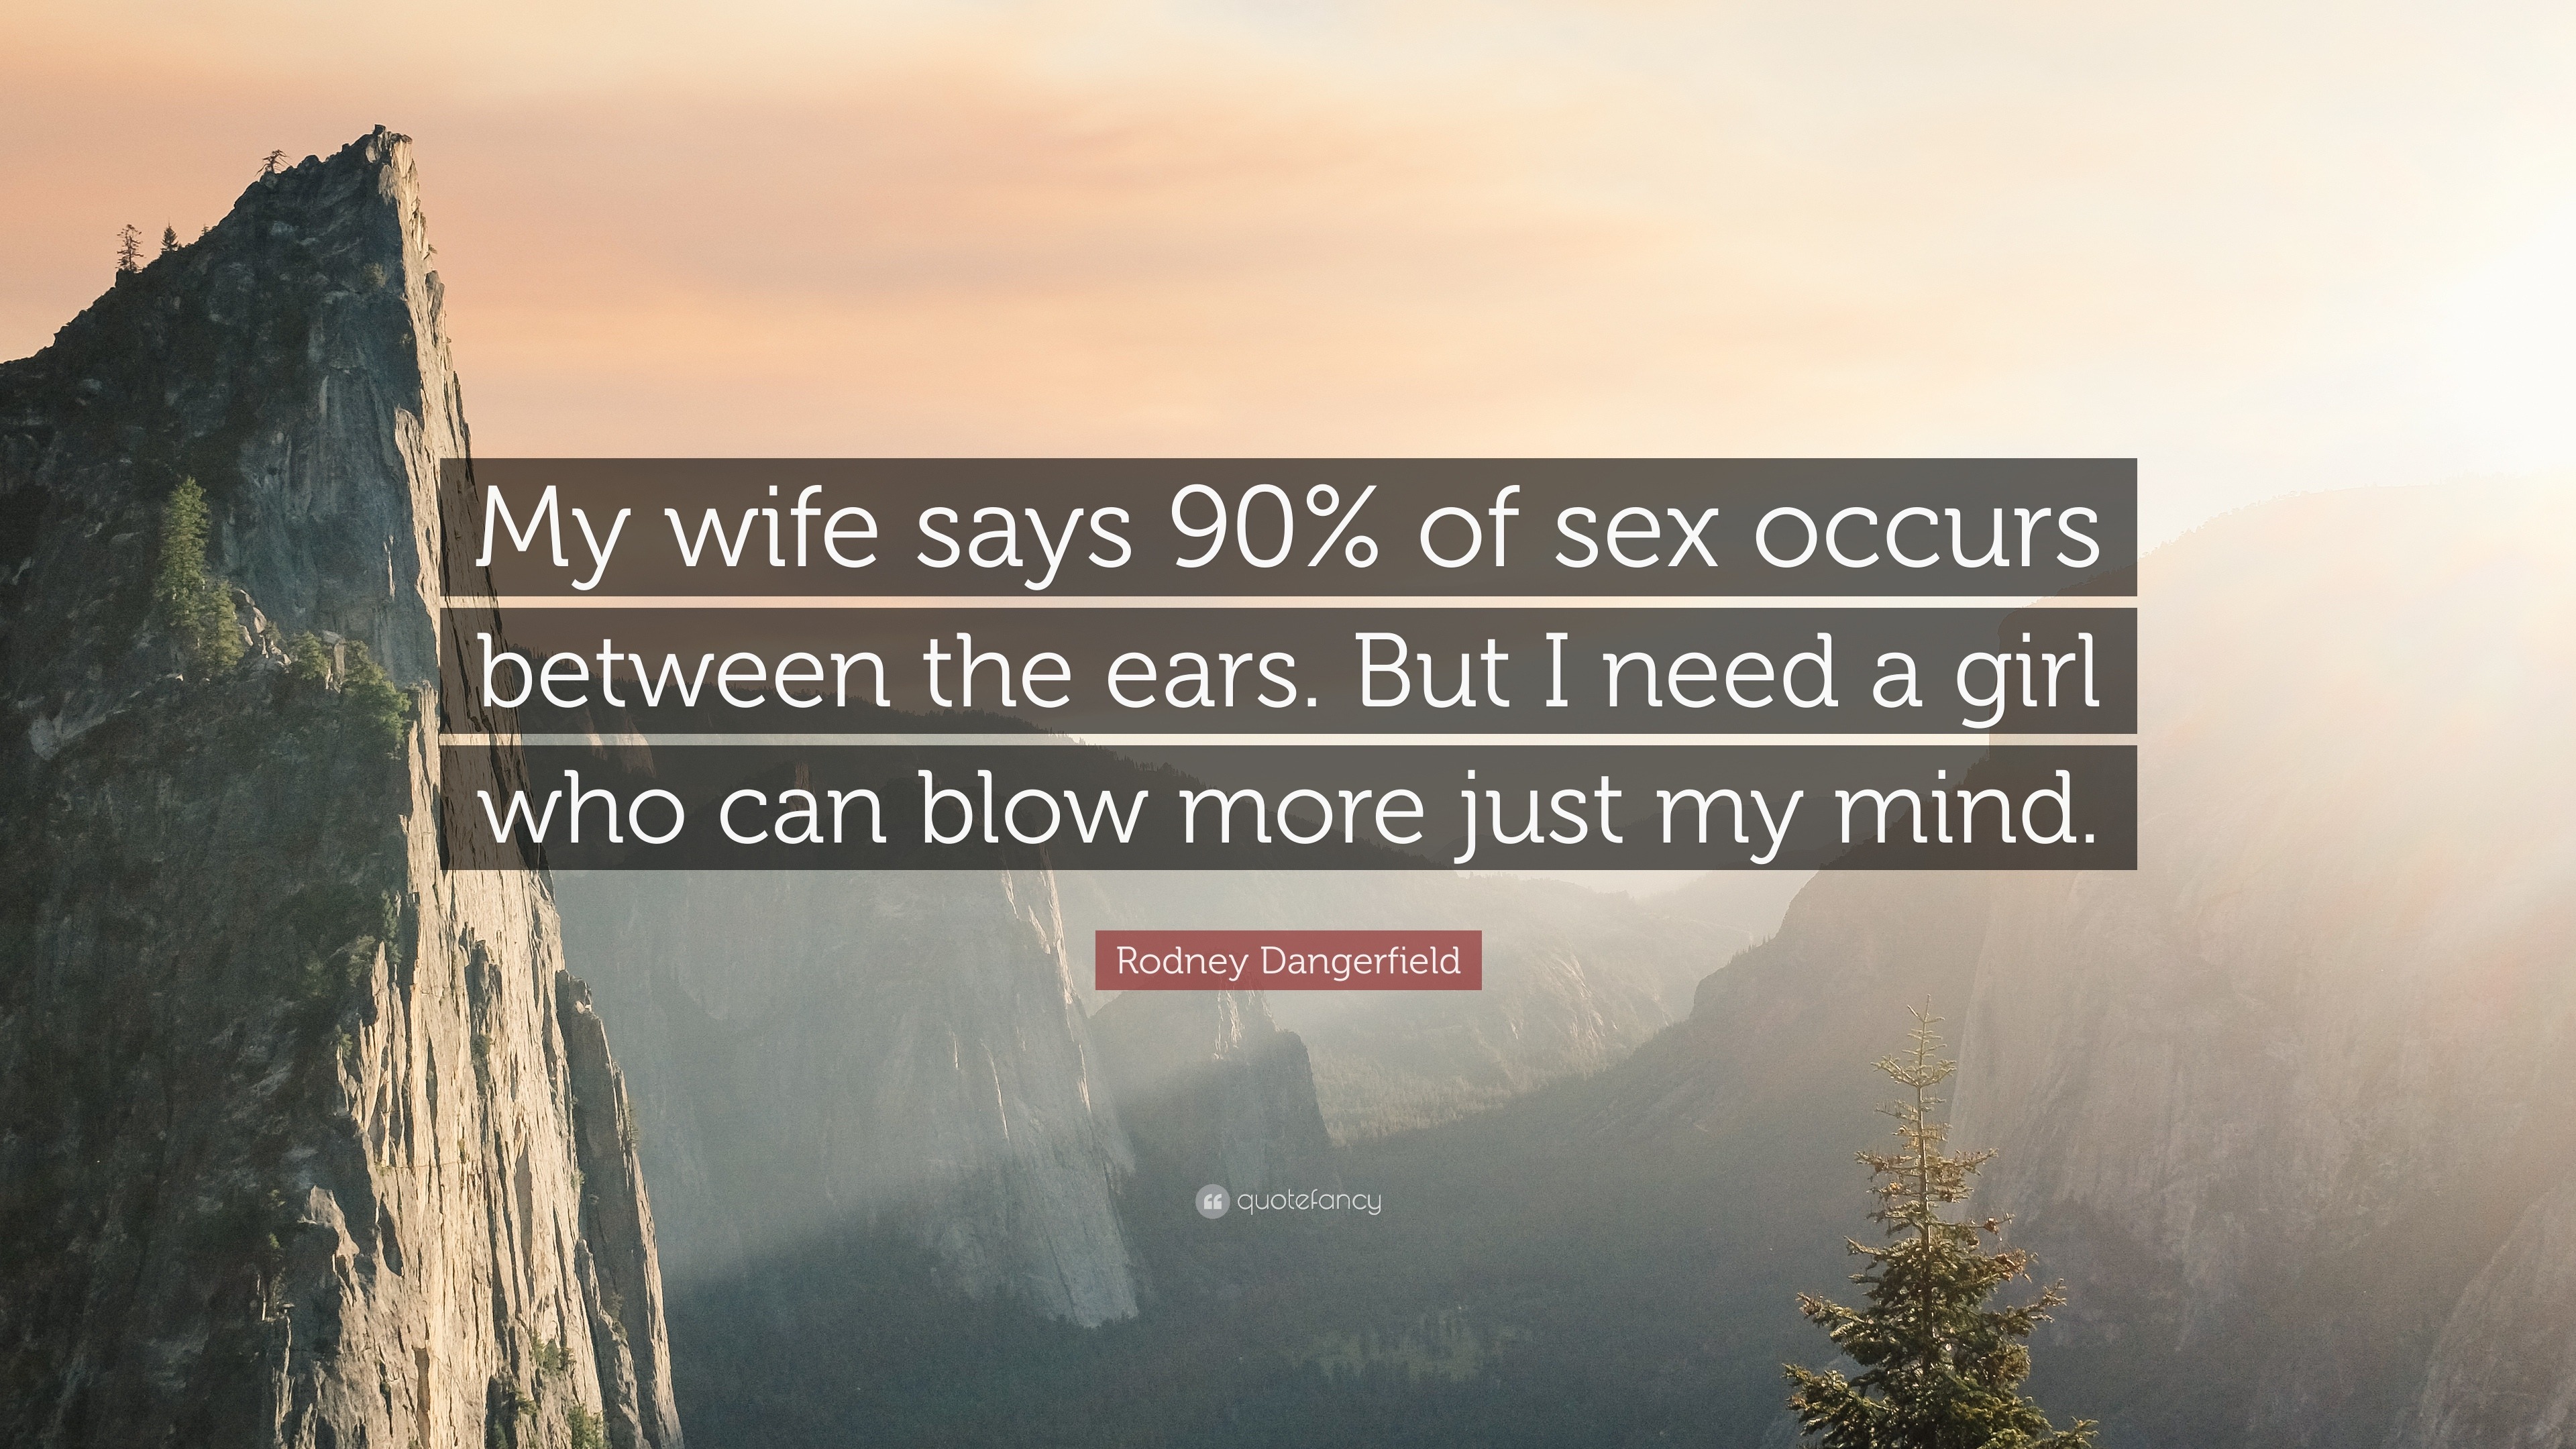 Rodney Dangerfield Quote “My wife says 90% of sex occurs between the ears pic